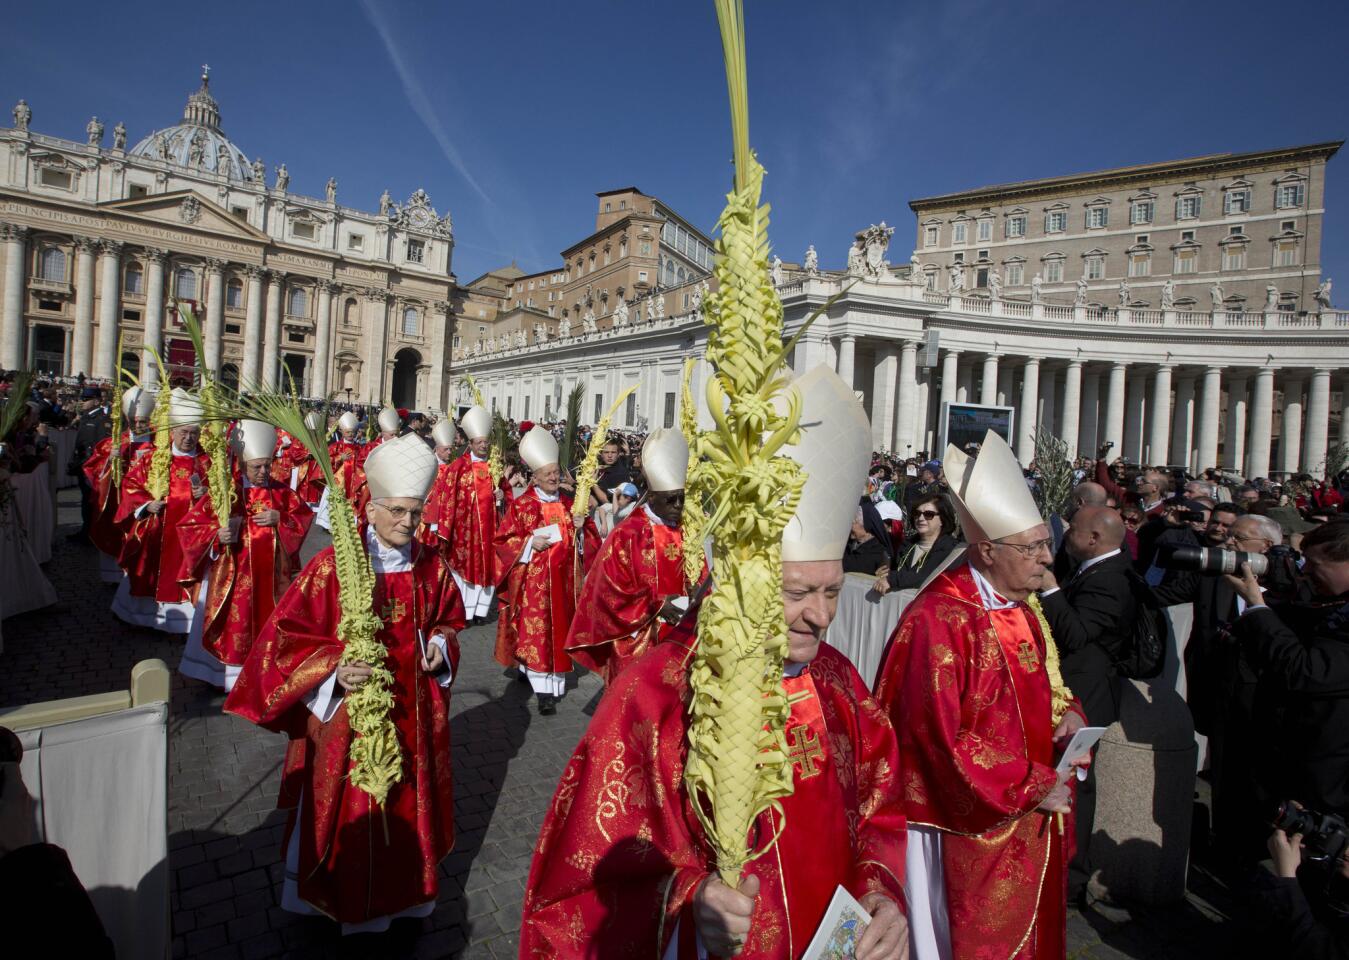 Cardinals walk in procession as they celebrate a Palm Sunday Mass, in St. Peter's Square, at the Vatican, Sunday, March 20, 2016.